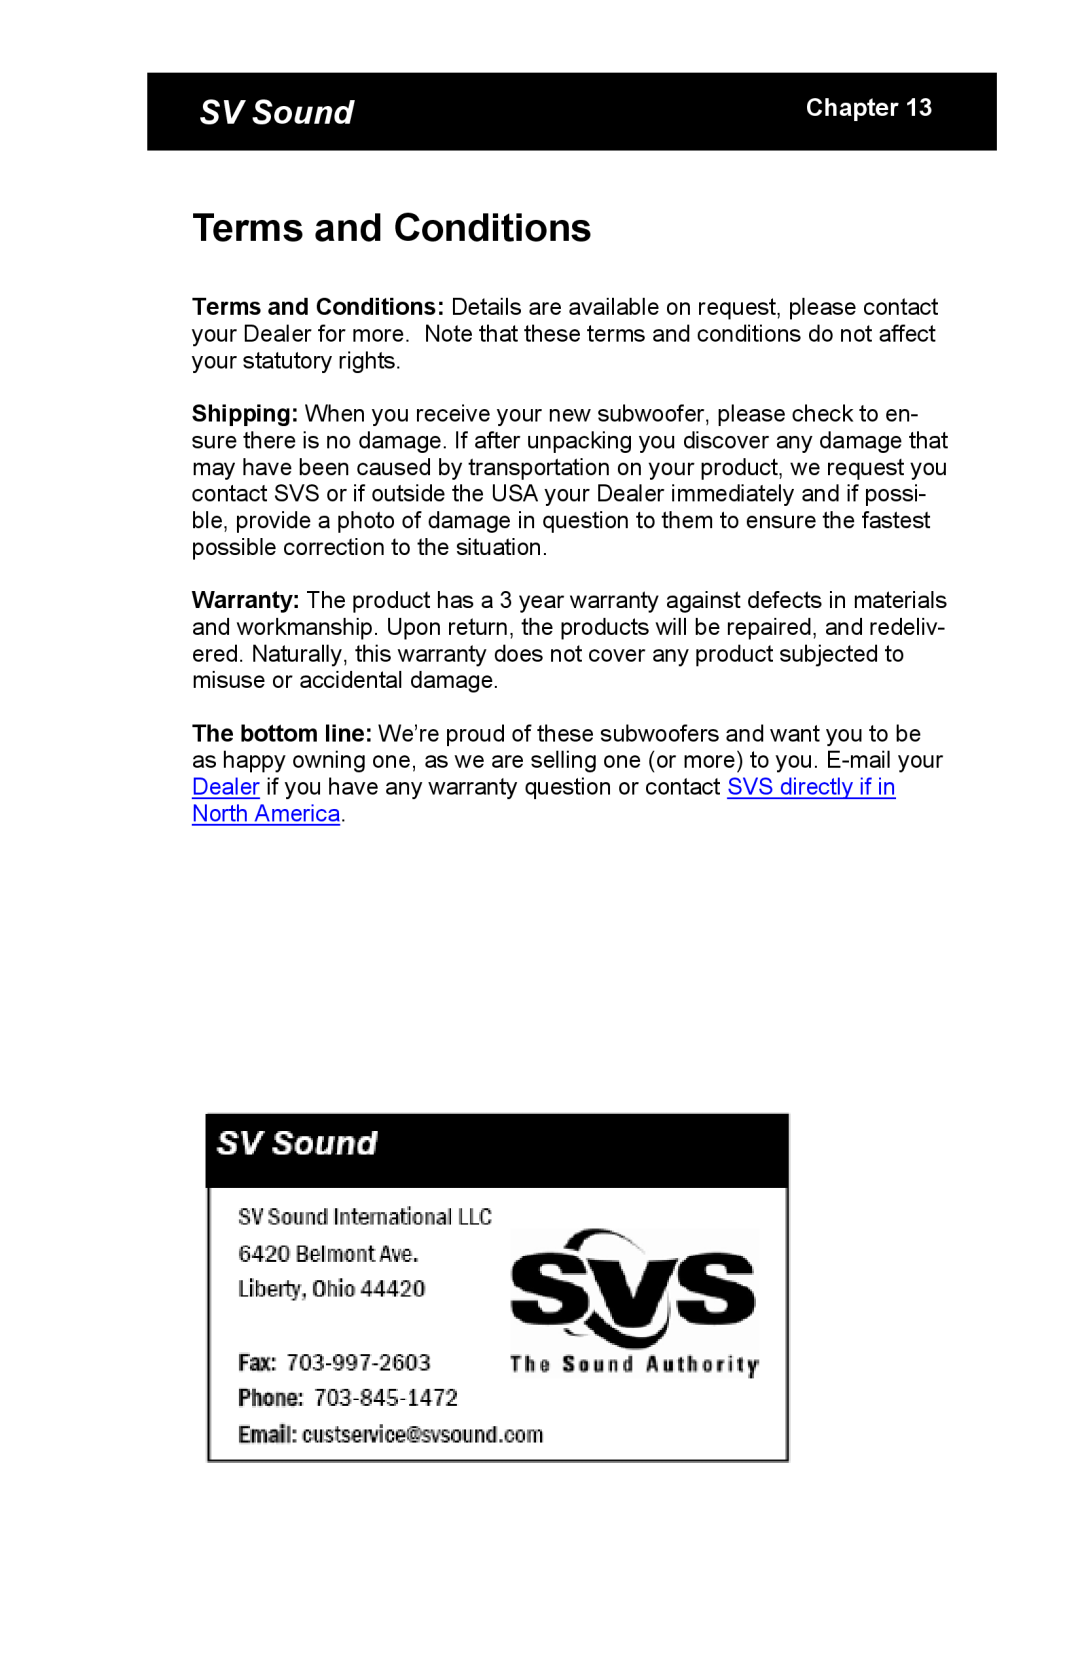 SV Sound MTS-01, SCS-01, SBS-01 specifications Terms and Conditions, SV Sound, Chapter 